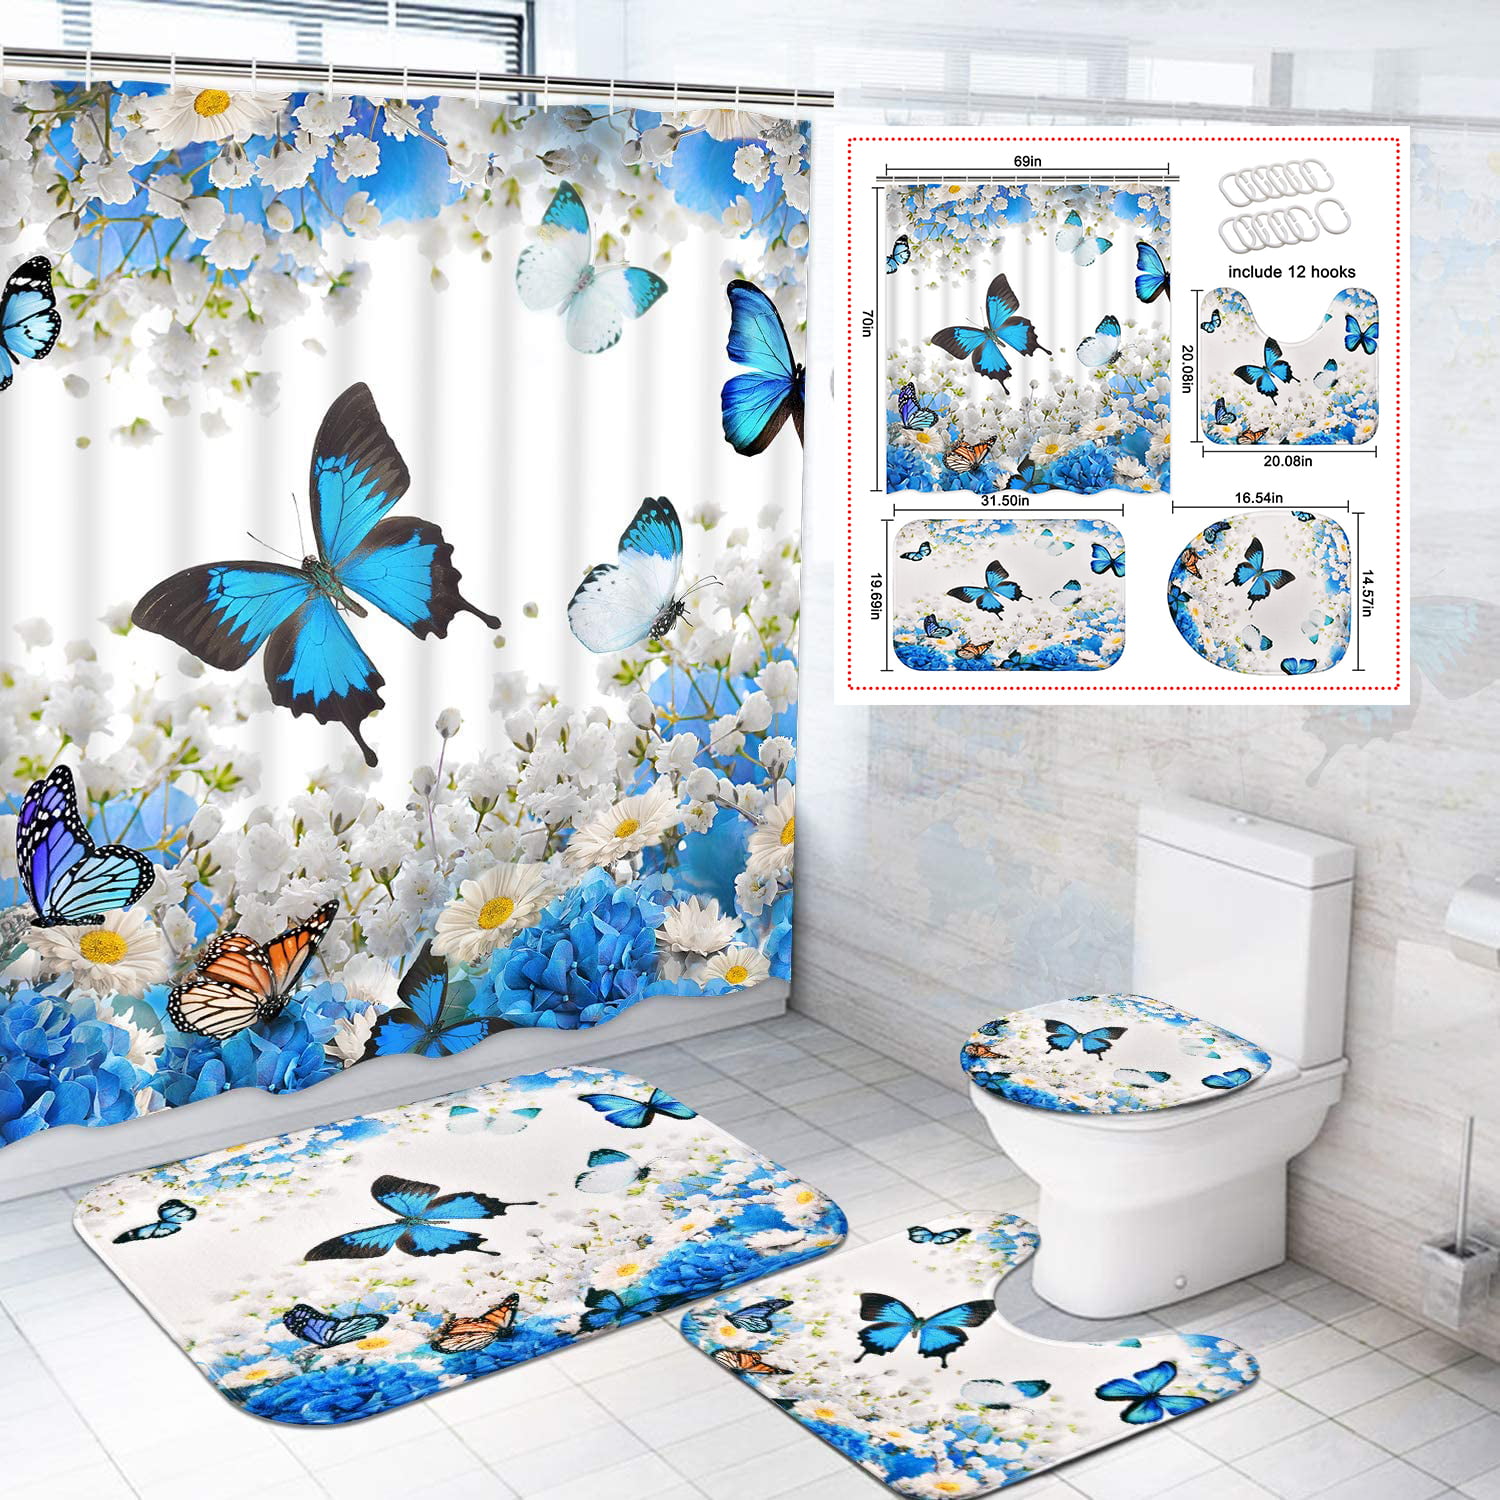 Blue Butterfly and Red Butterfly Shower Curtain Bathroom Decor Fabric & 12hooks 